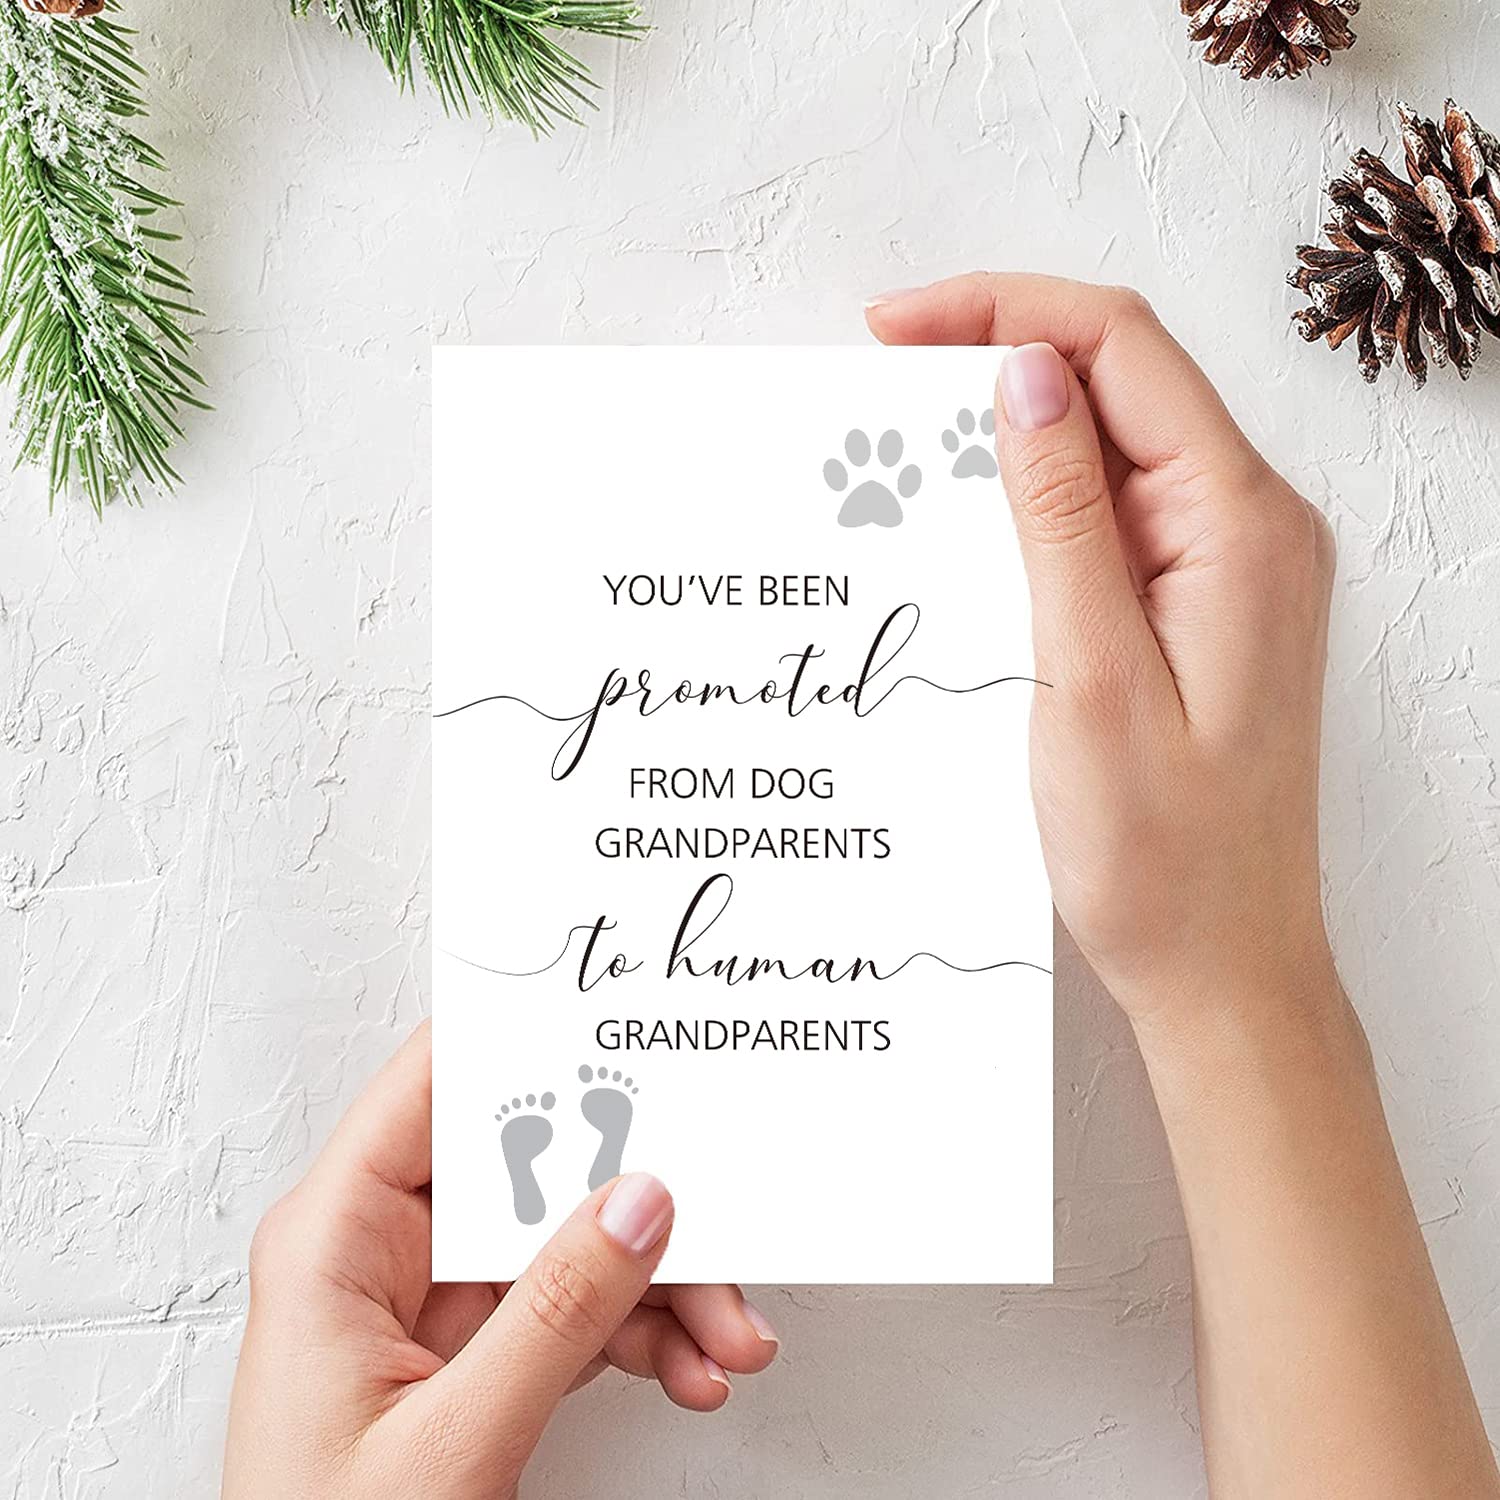 Funny Pregnancy Announcement Card for Grandparents, New Baby Card, Cute Pregnancy Revel Card for Grandparents, Promoted to Human Grandparents